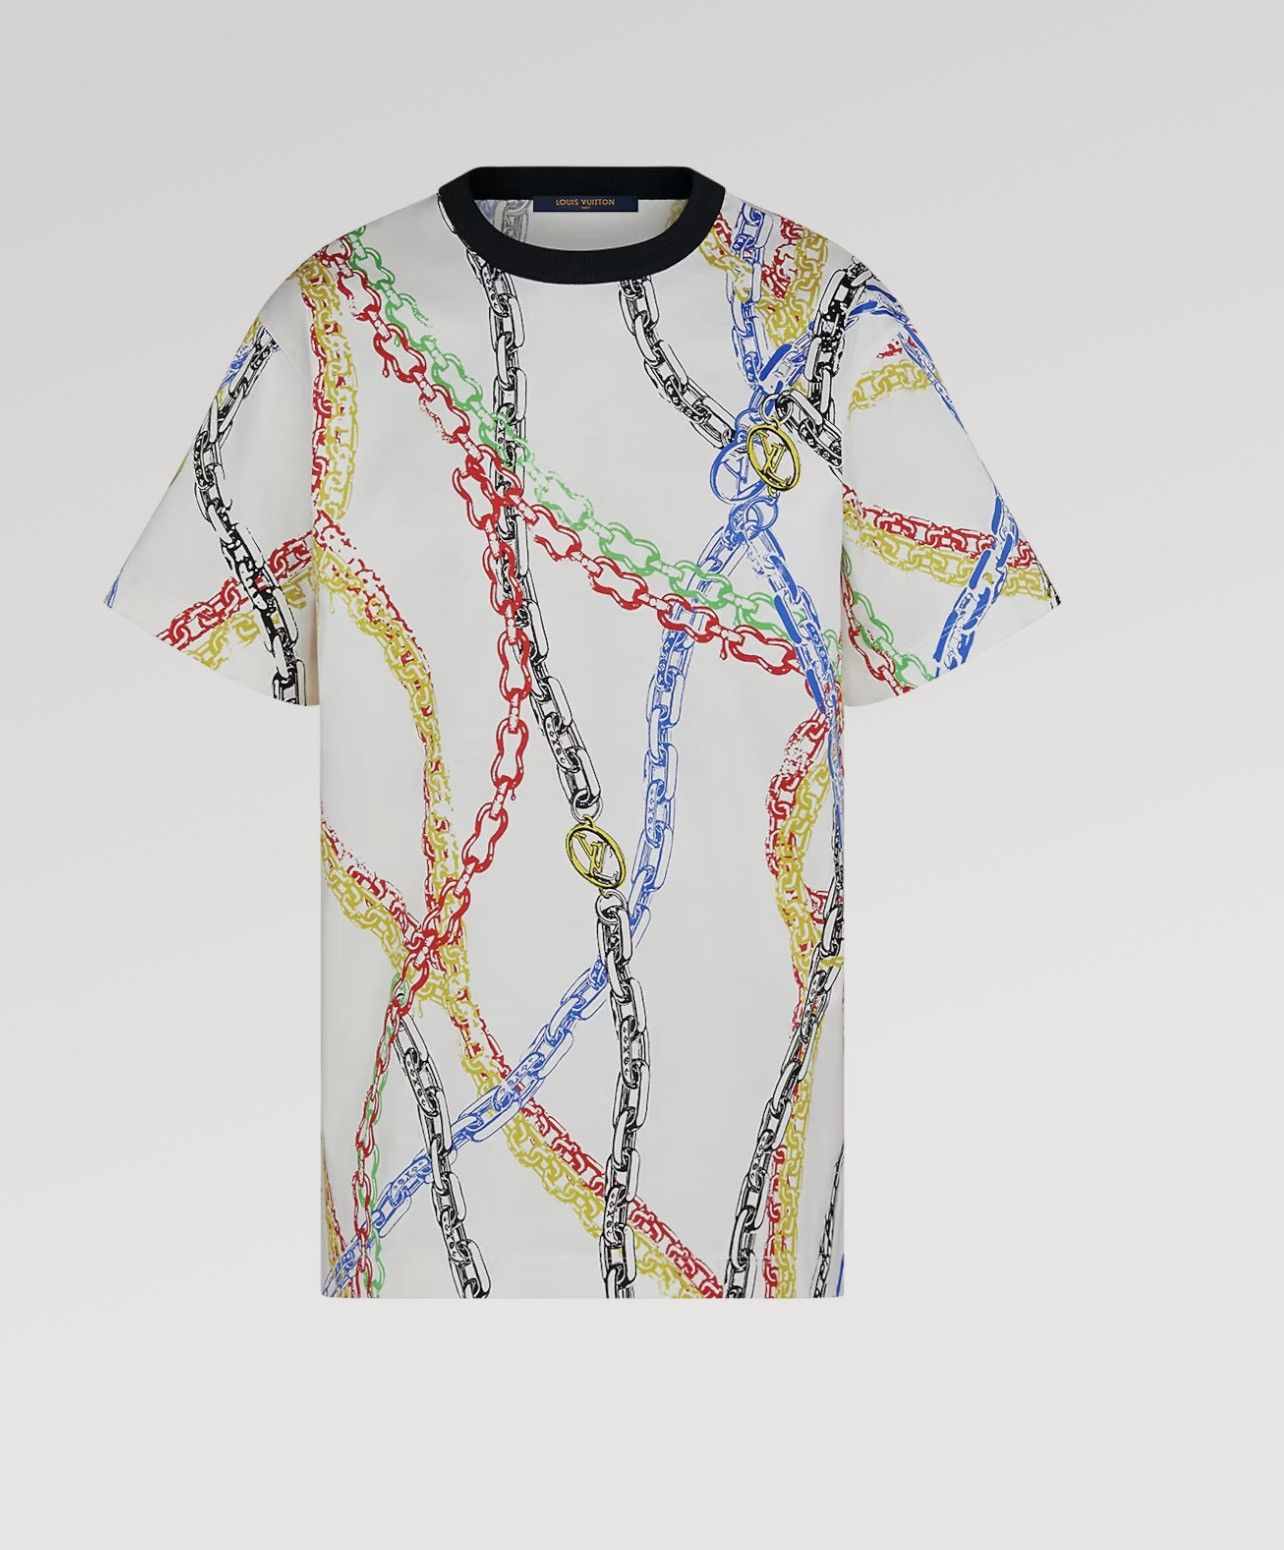 Louis Vuitton 1ABYHO Oversized LV Chain T-Shirt